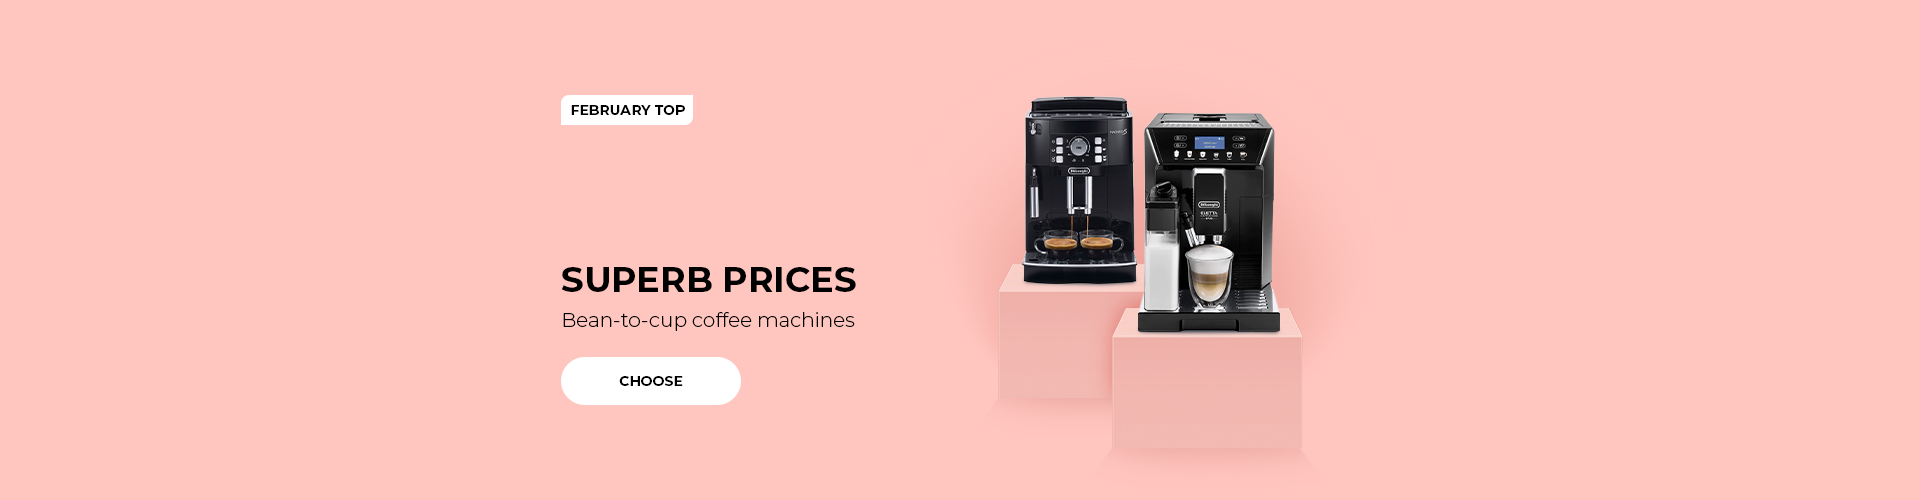 Superb prices on bean-to-cup coffee machines